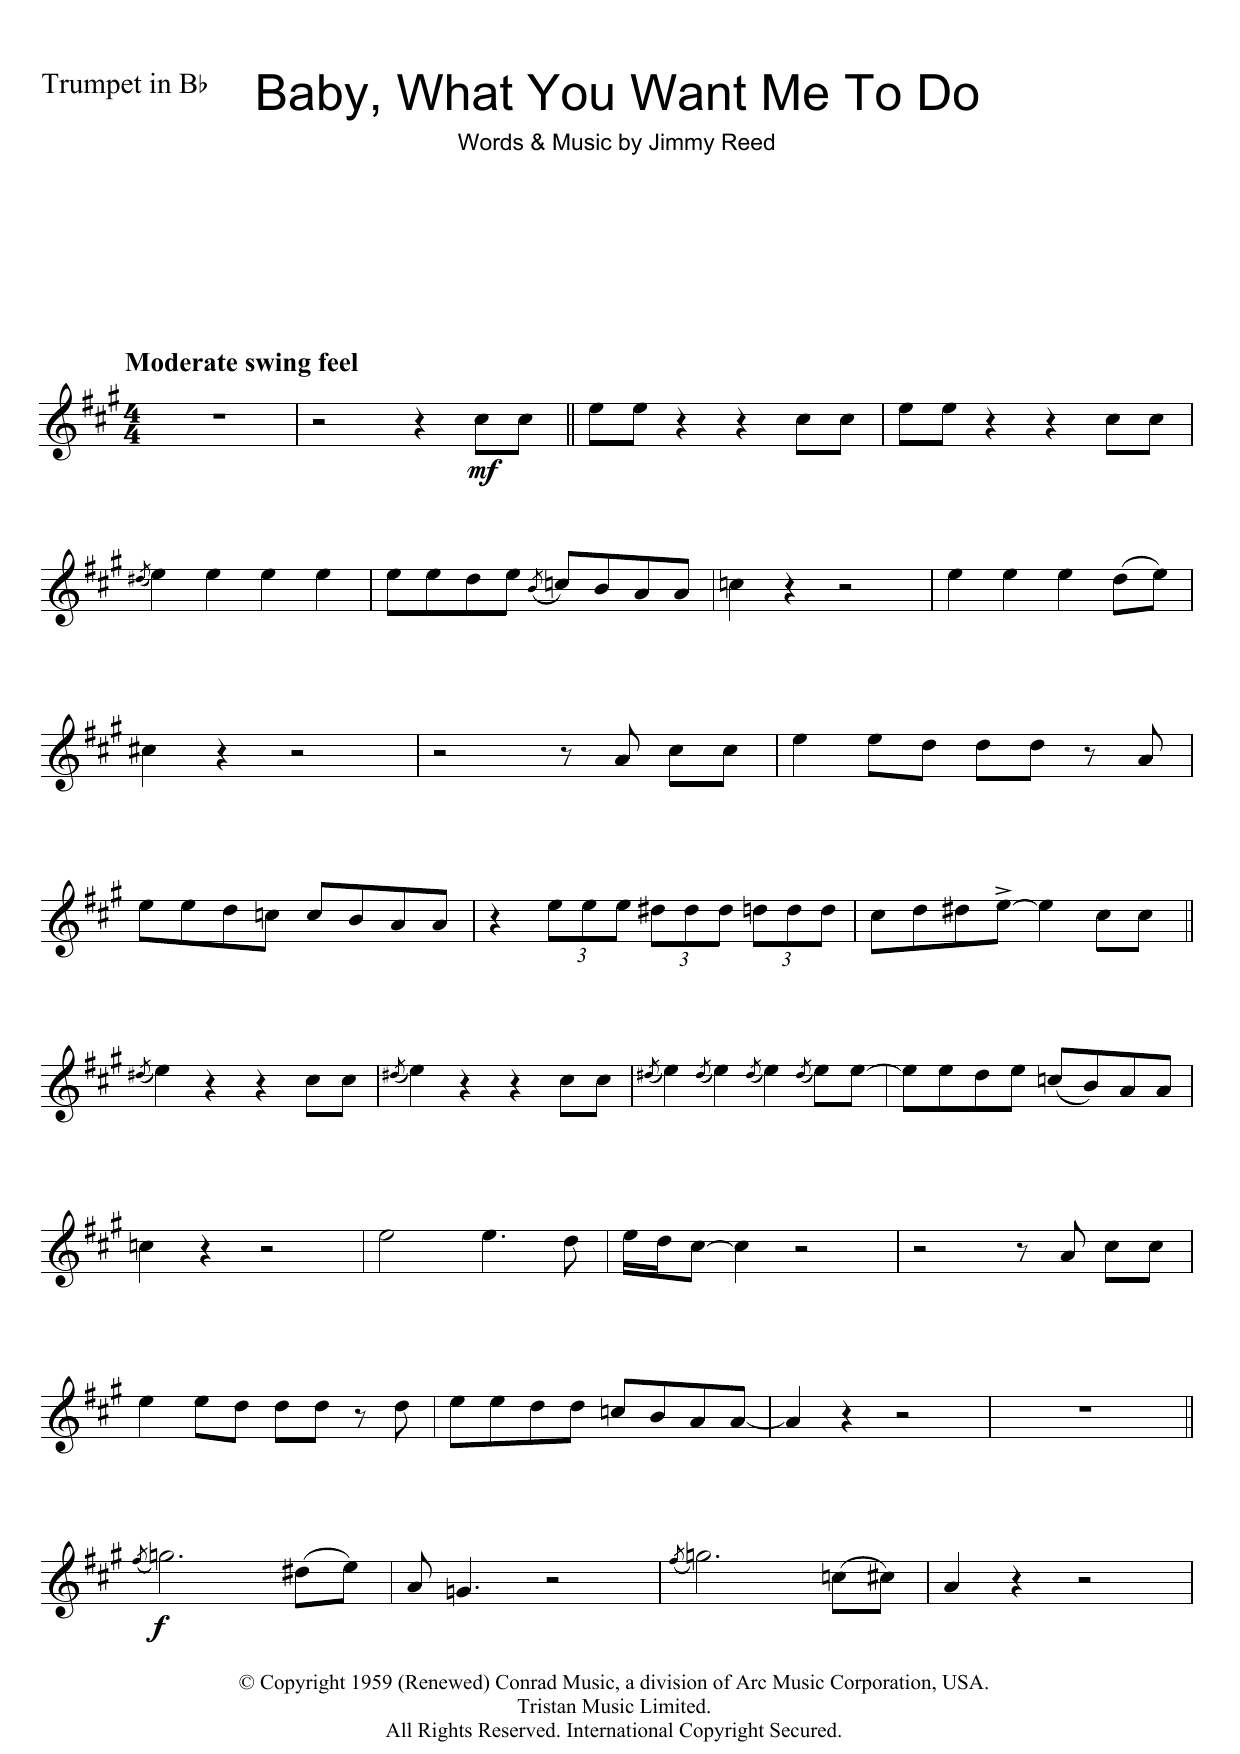 Download Etta James Baby, What You Want Me To Do Sheet Music